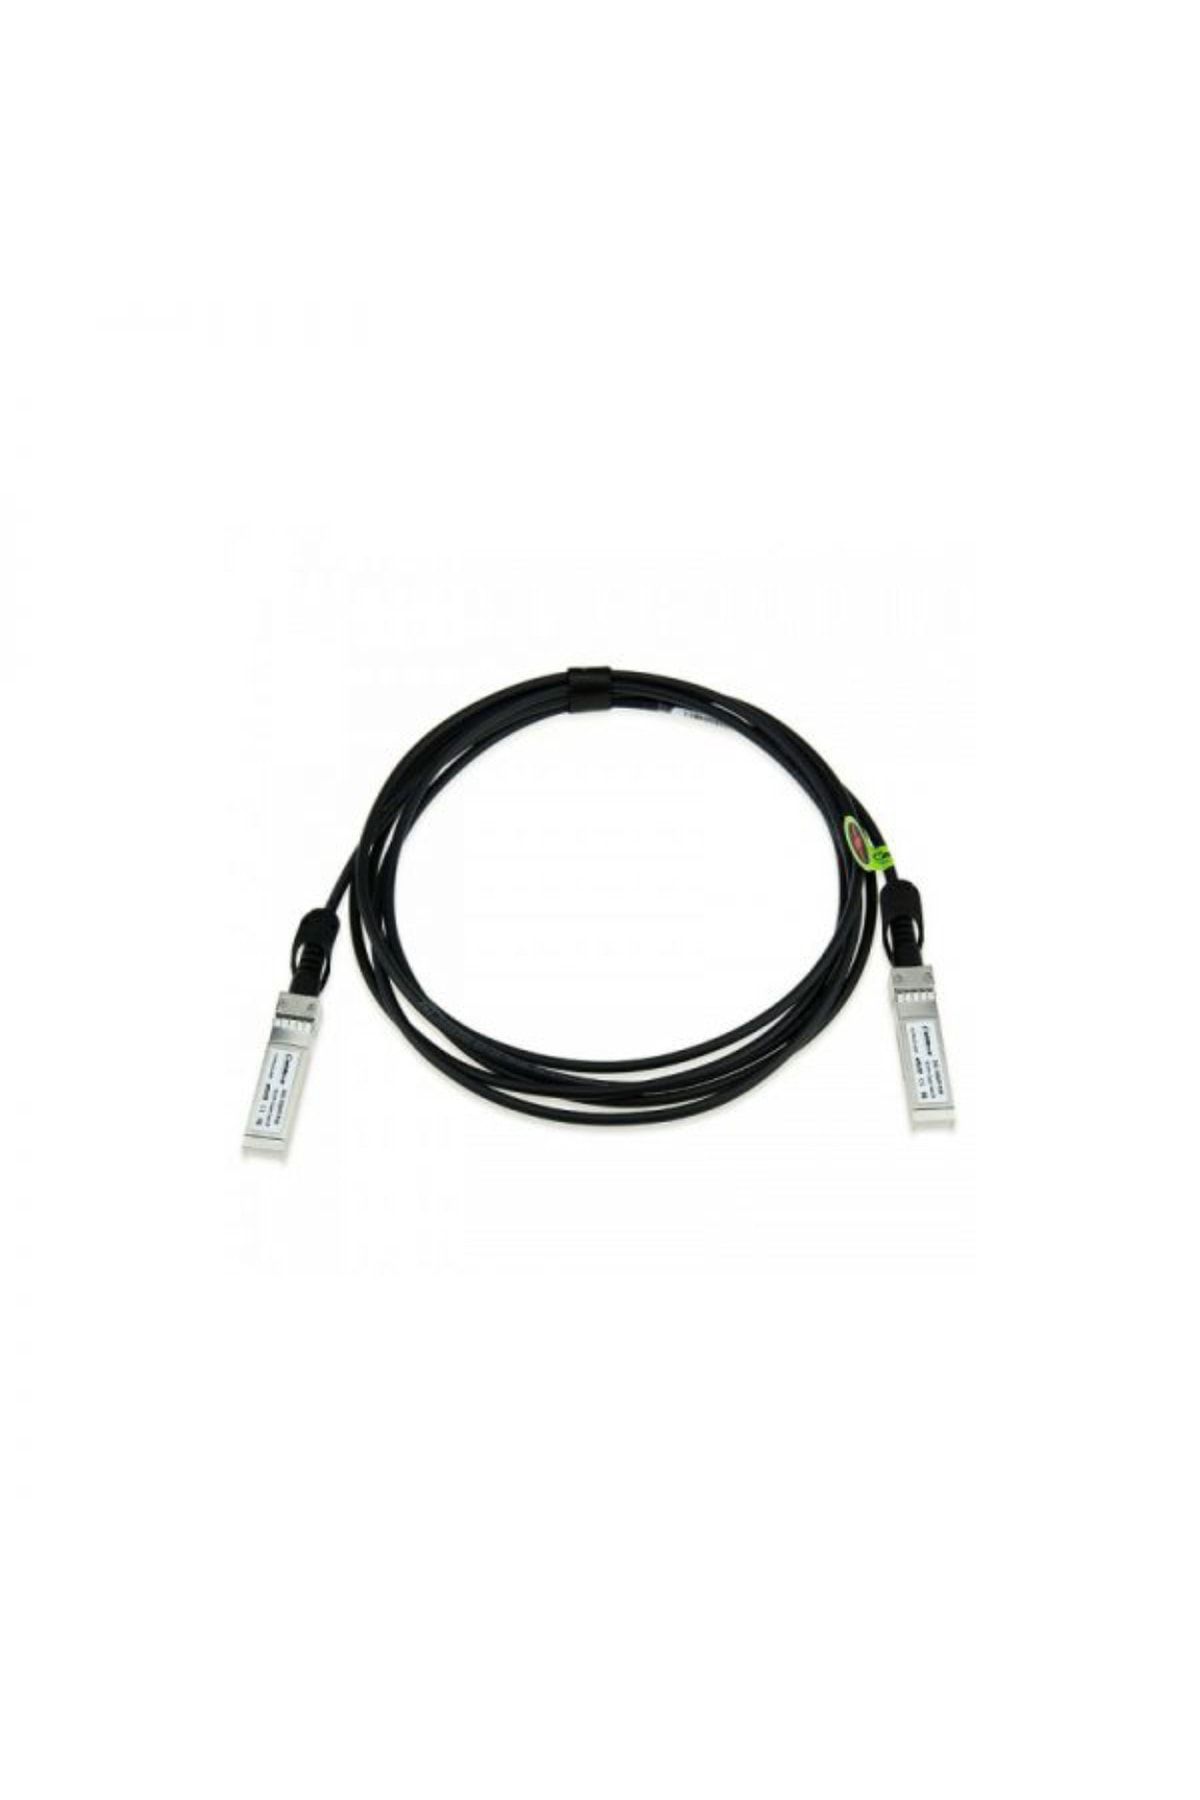 Huawei Sfp-10g-cu3m Sfp+,10g,high Speed Direct-attach Cables